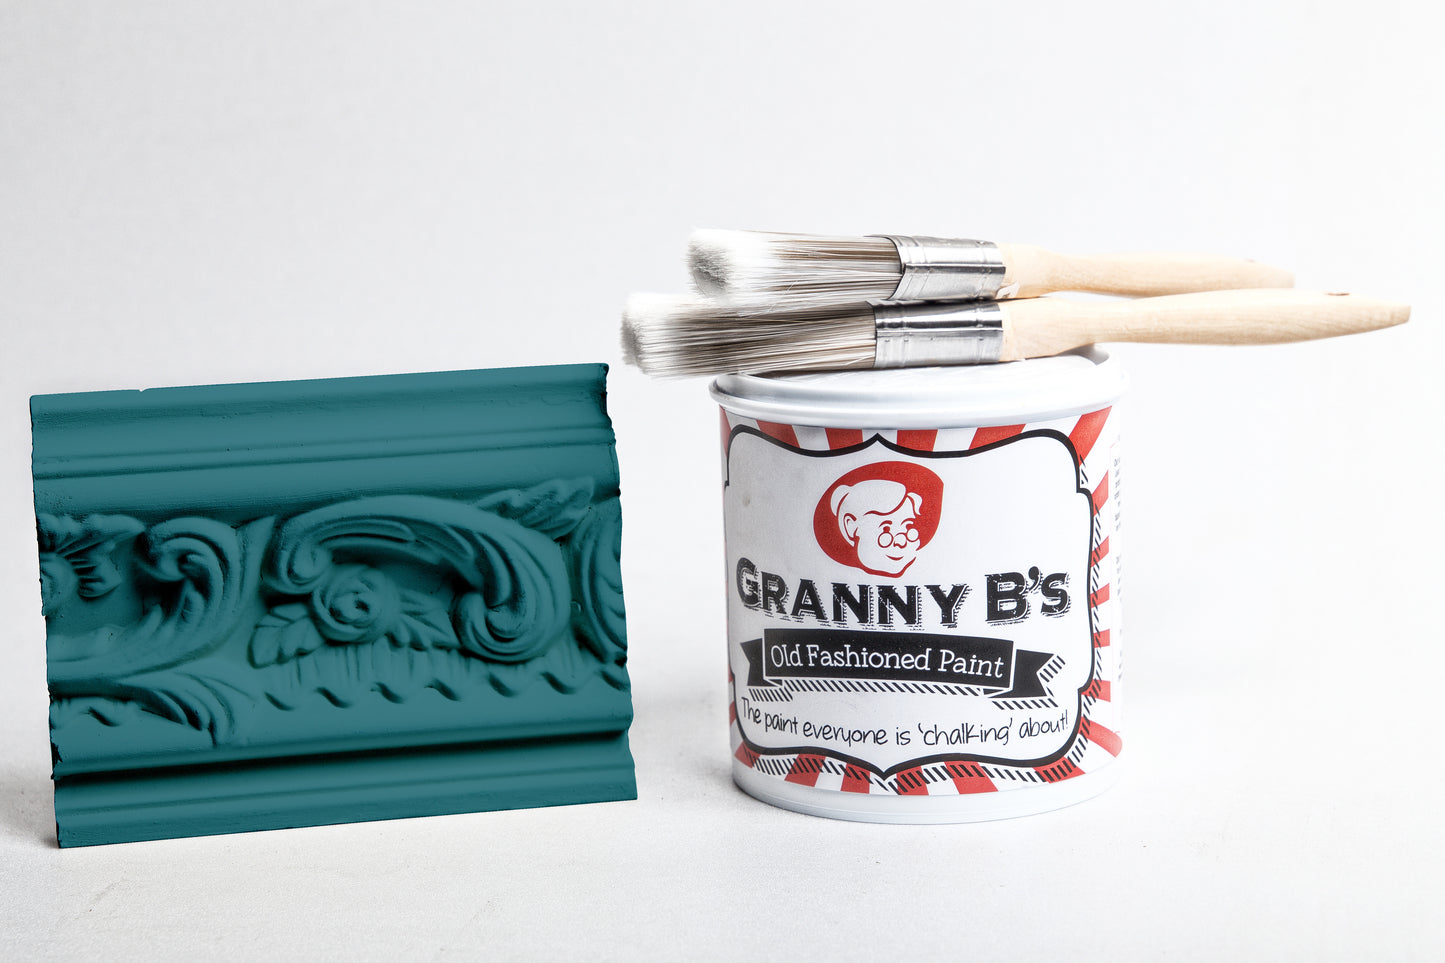 Old Fashioned Paint - Gatsby - Granny B's Old Fashioned Paint